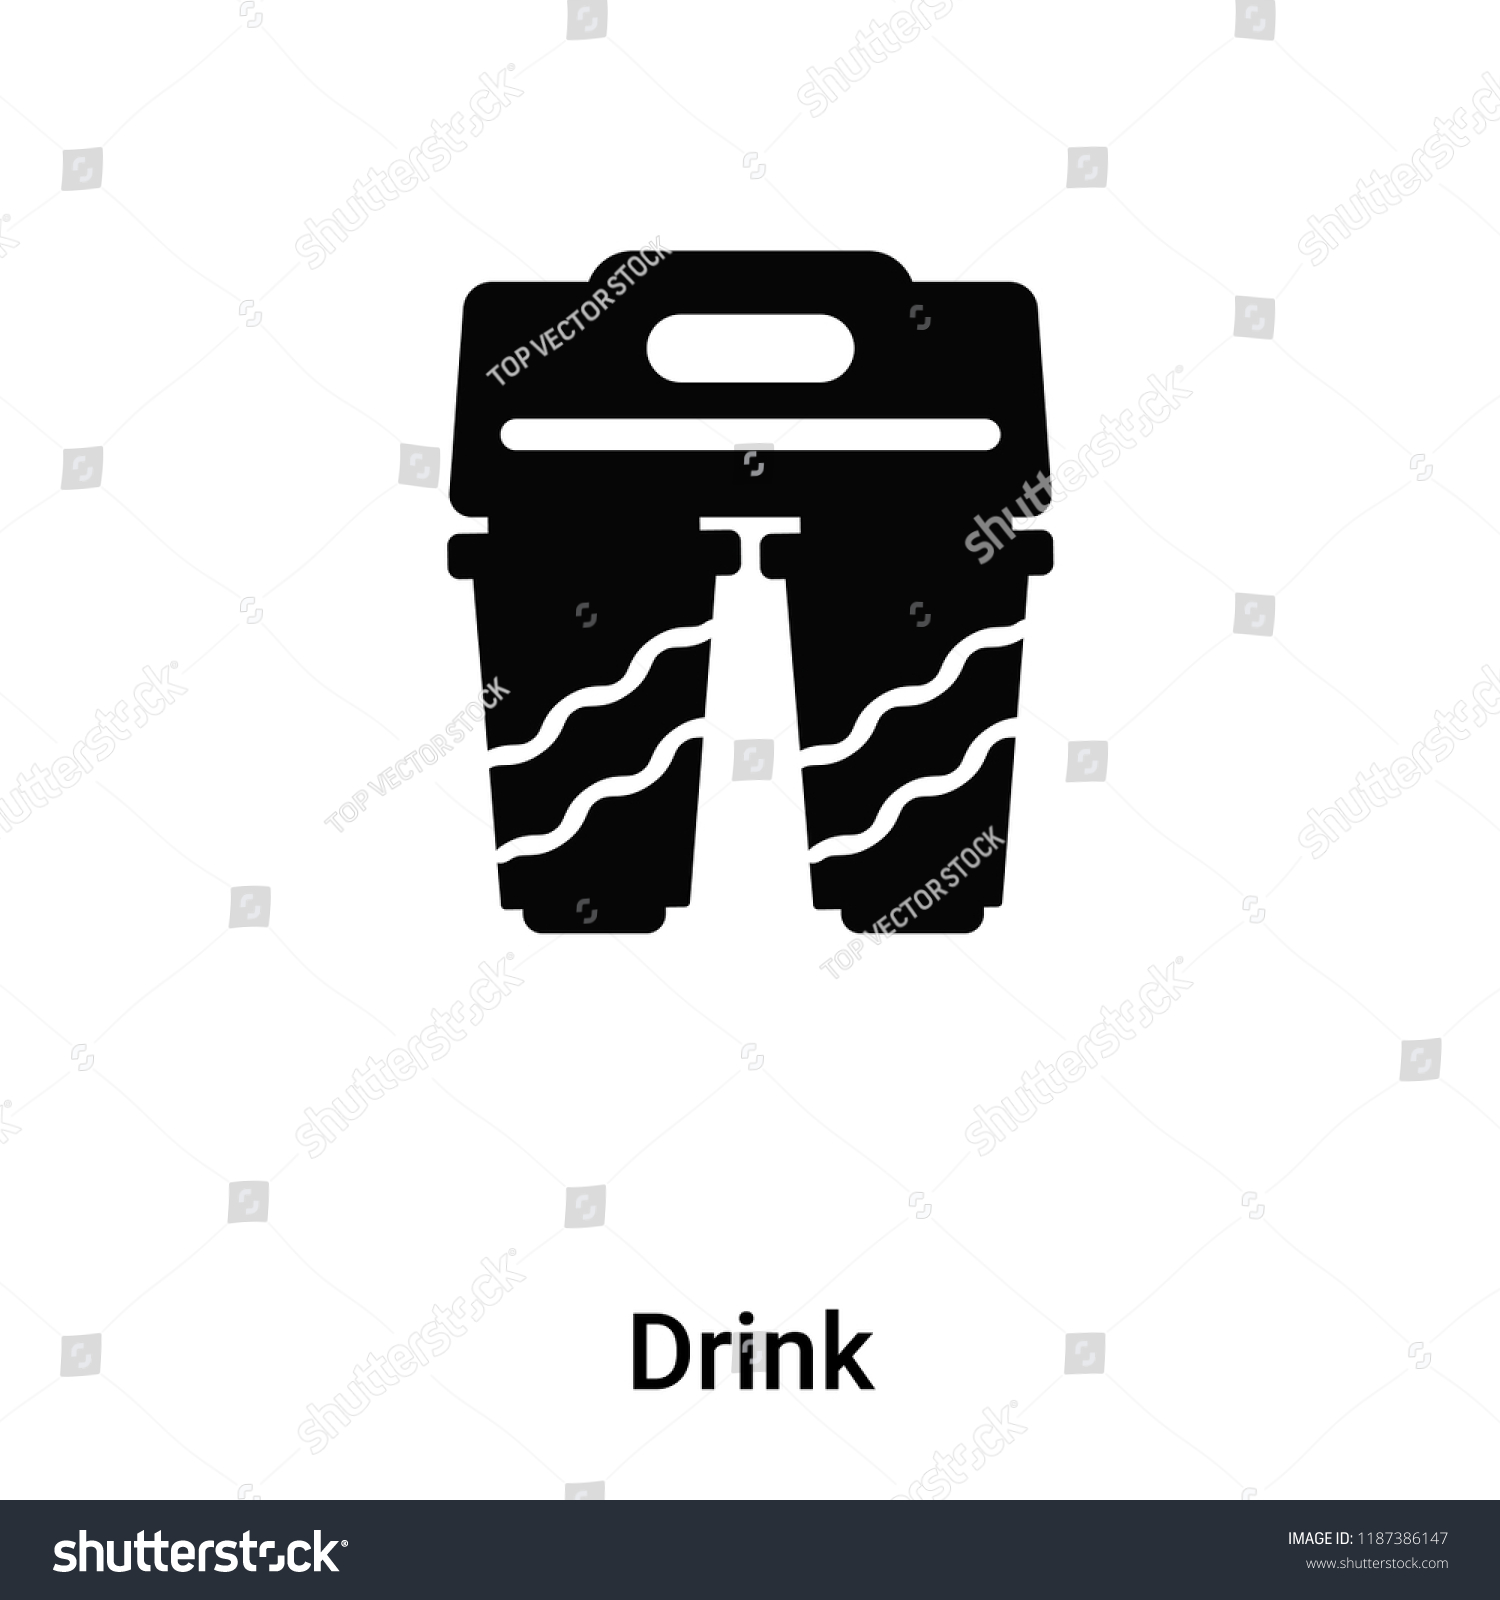 SVG of Drink icon vector isolated on white background, logo concept of Drink sign on transparent background, filled black symbol svg